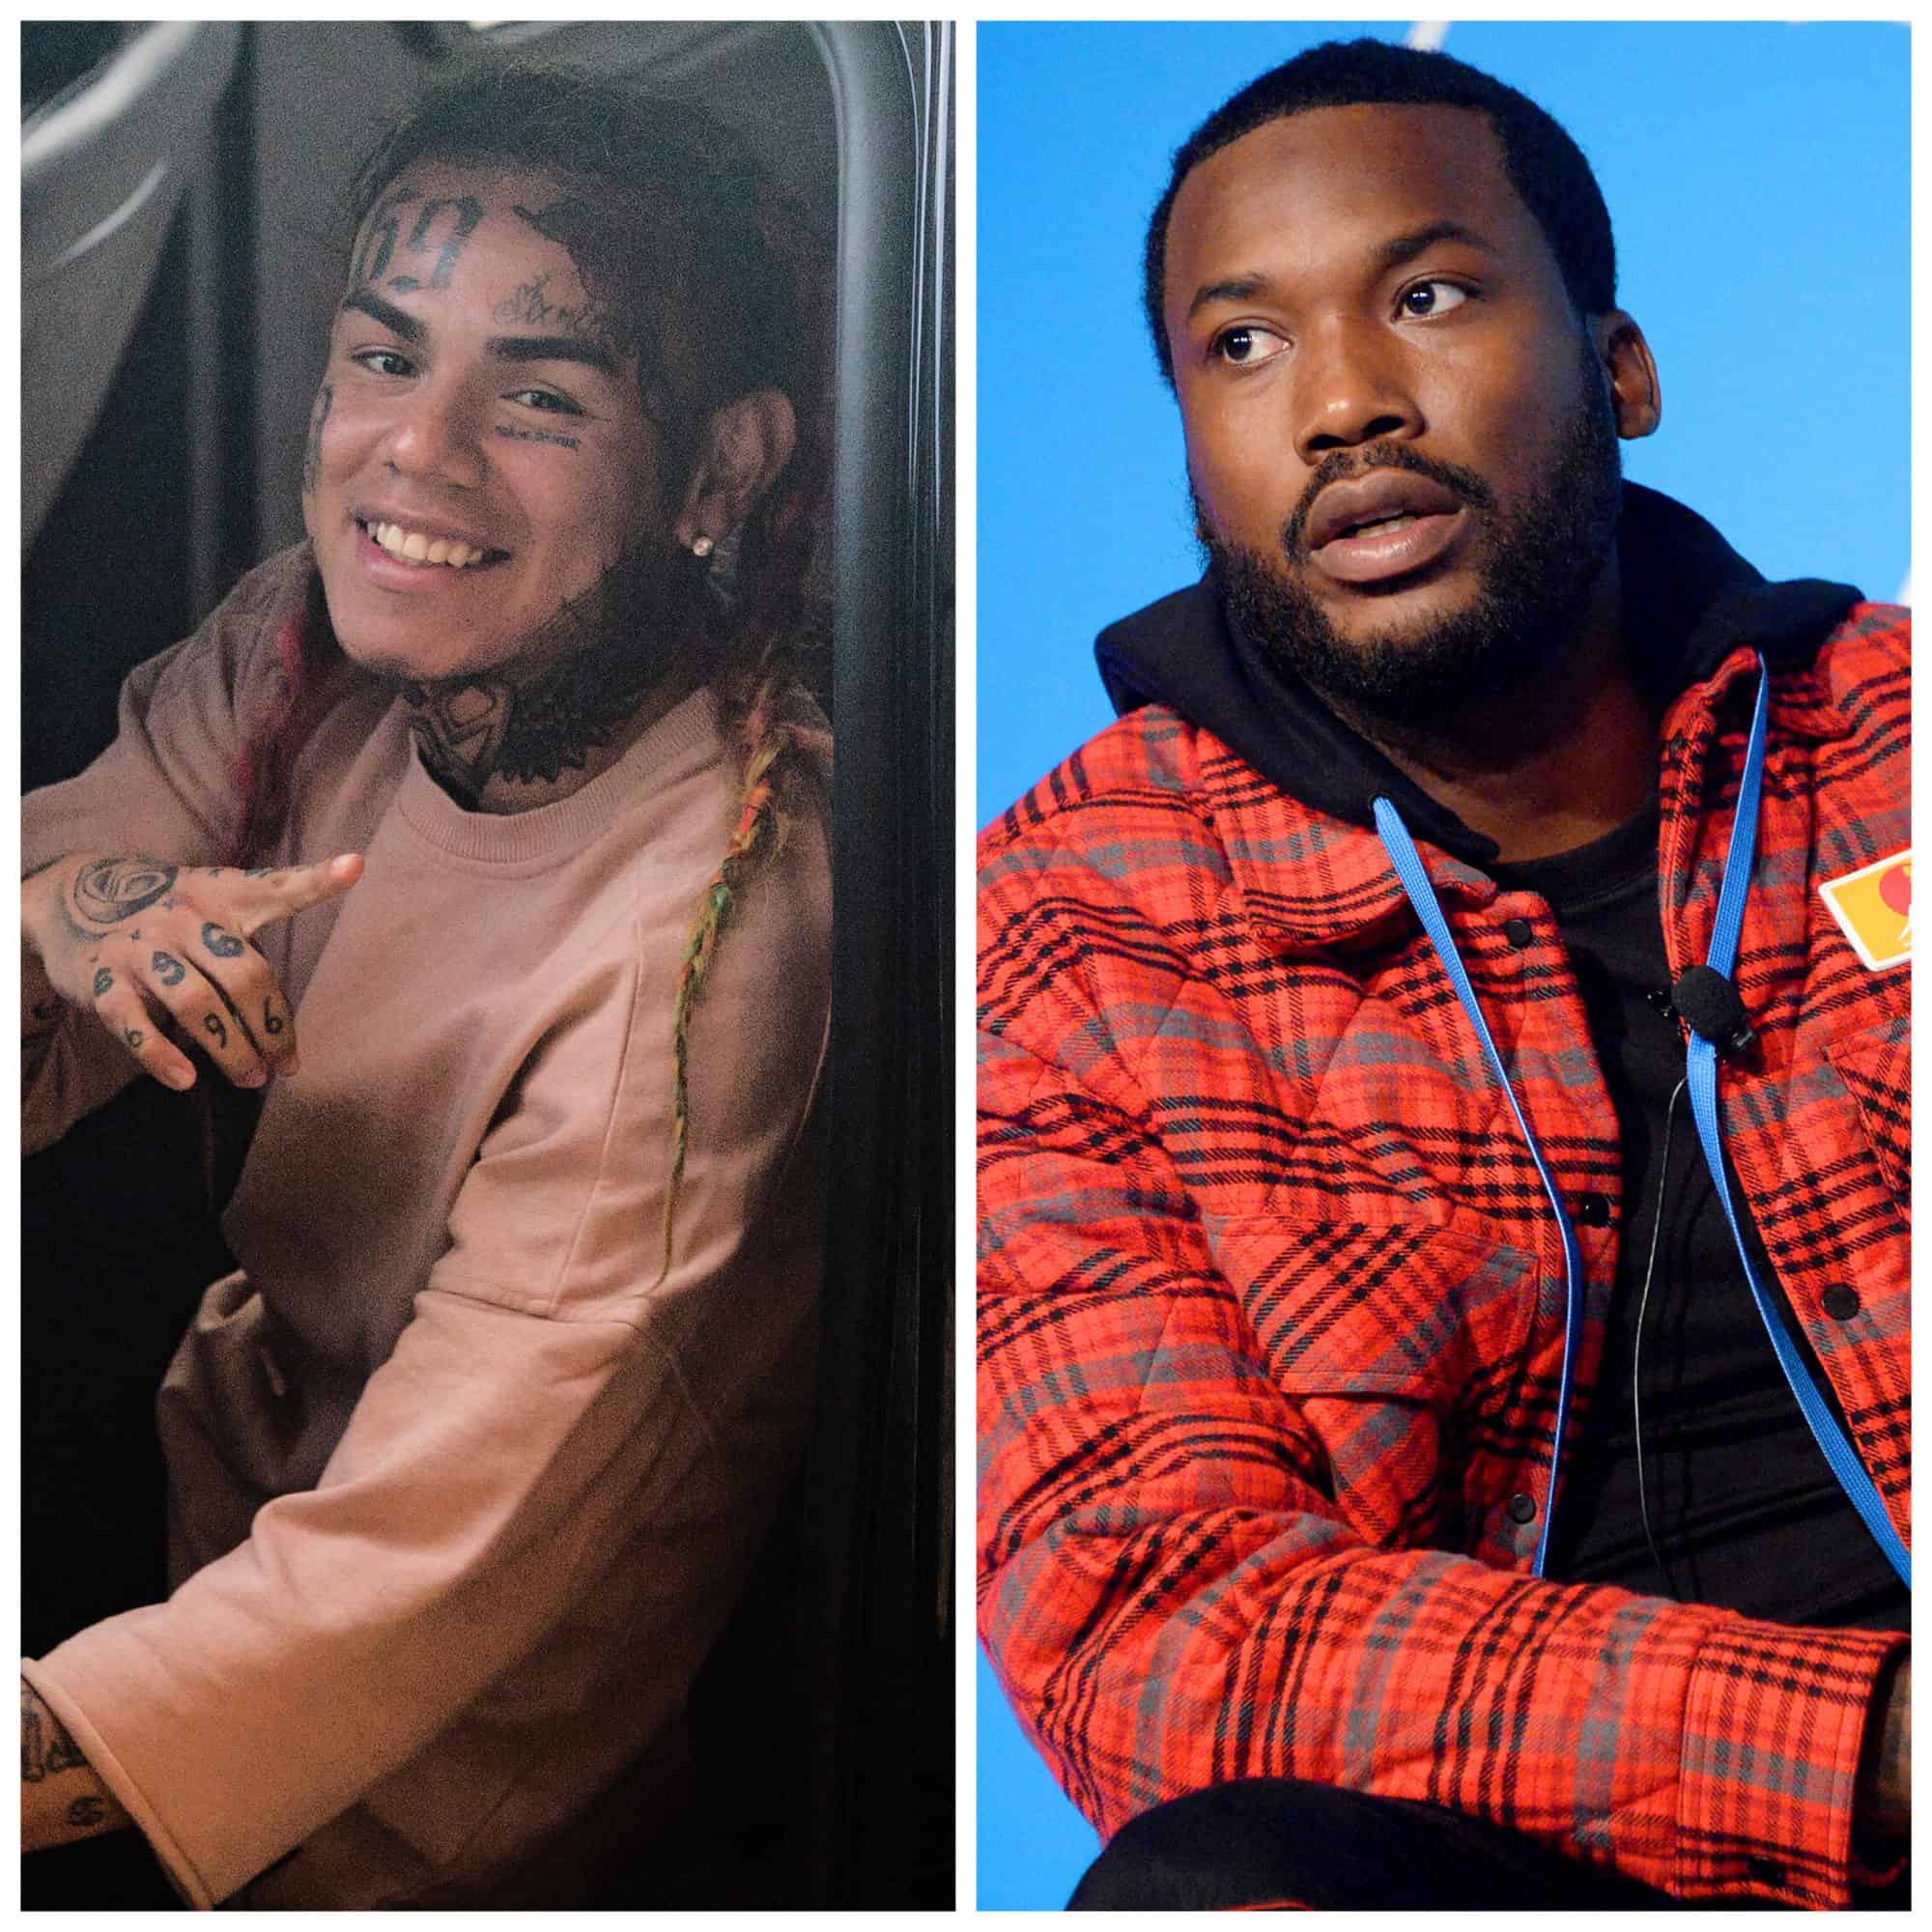 Meek Mill And Tekashi 69 Get Into Shouting Match That Almost Turned Physical Outside Atlanta Club (Video)